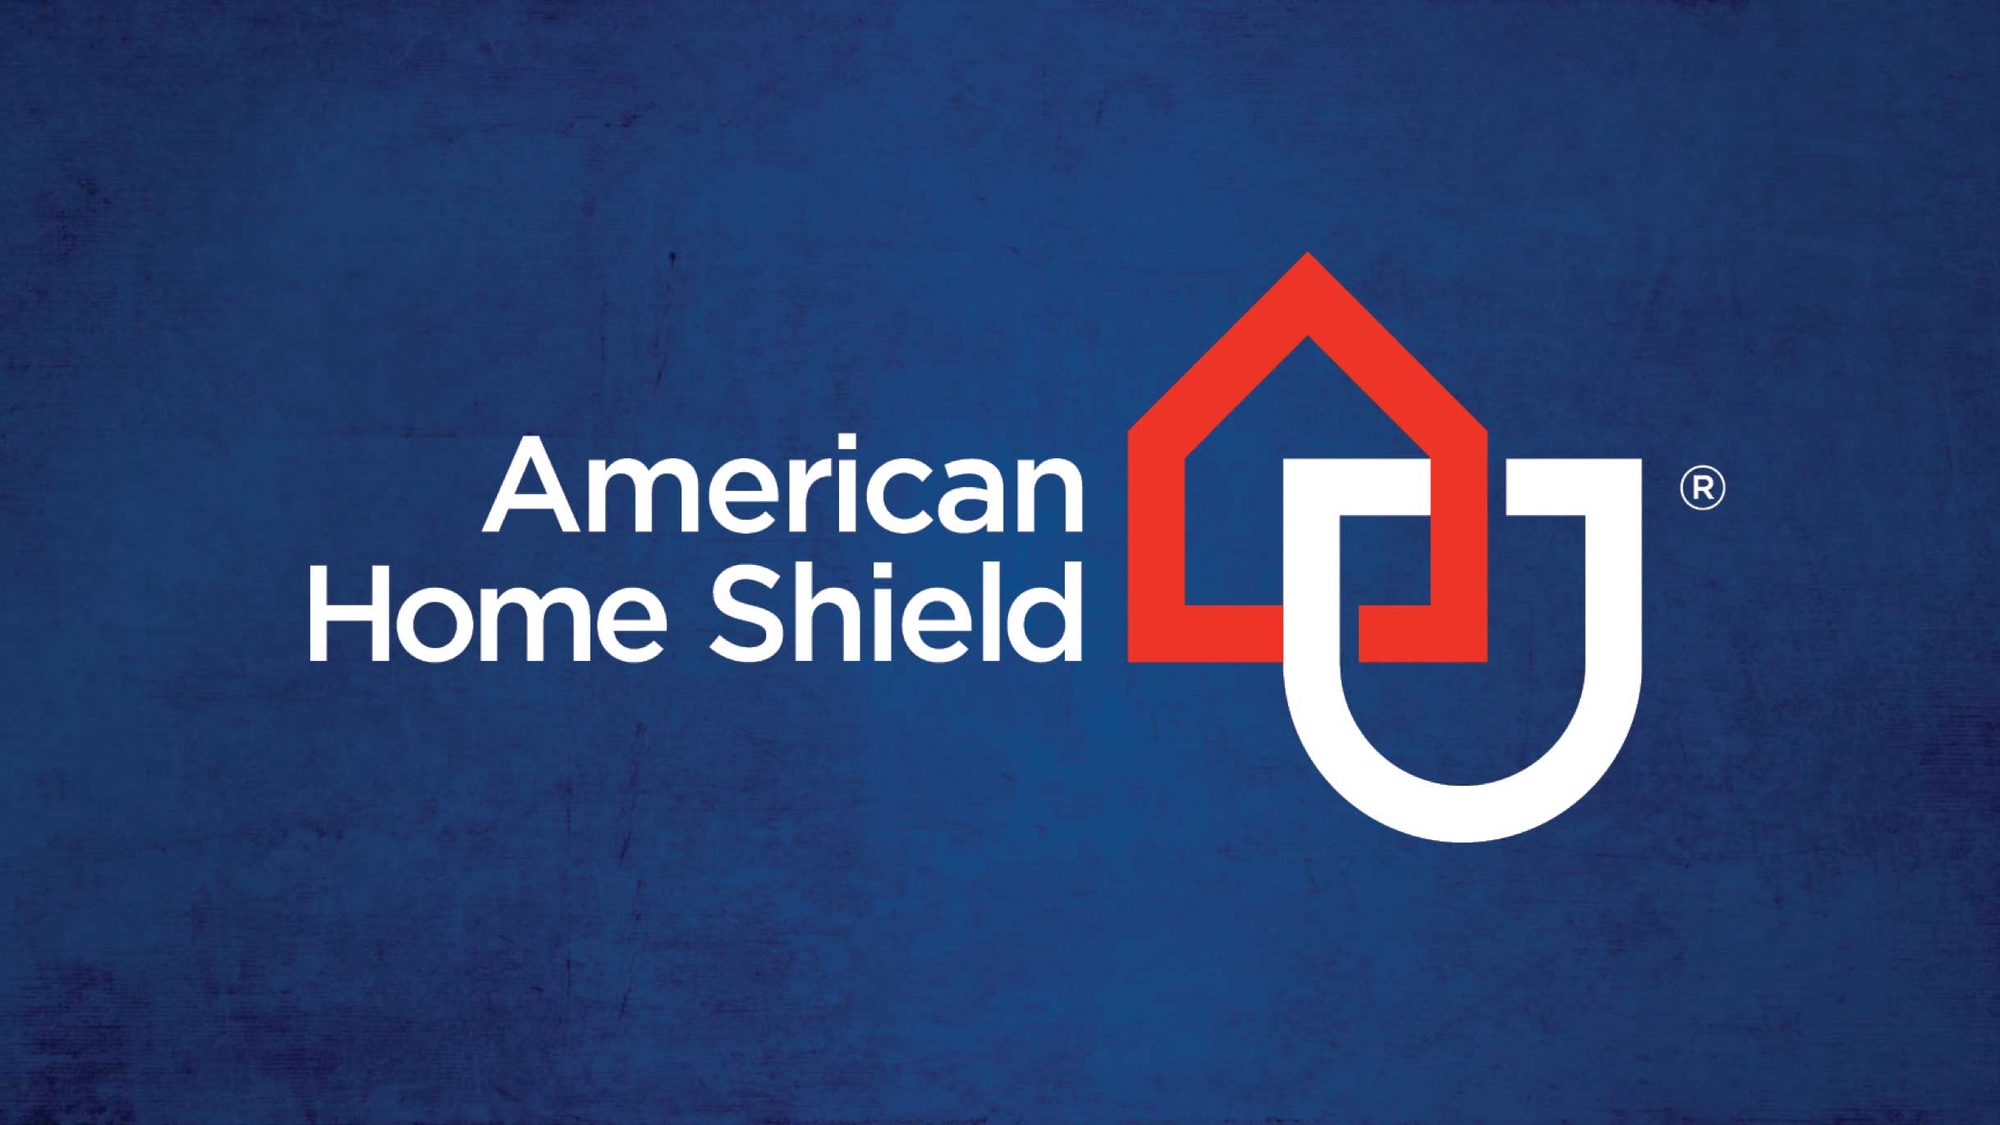 American Home Shield logo on blue background